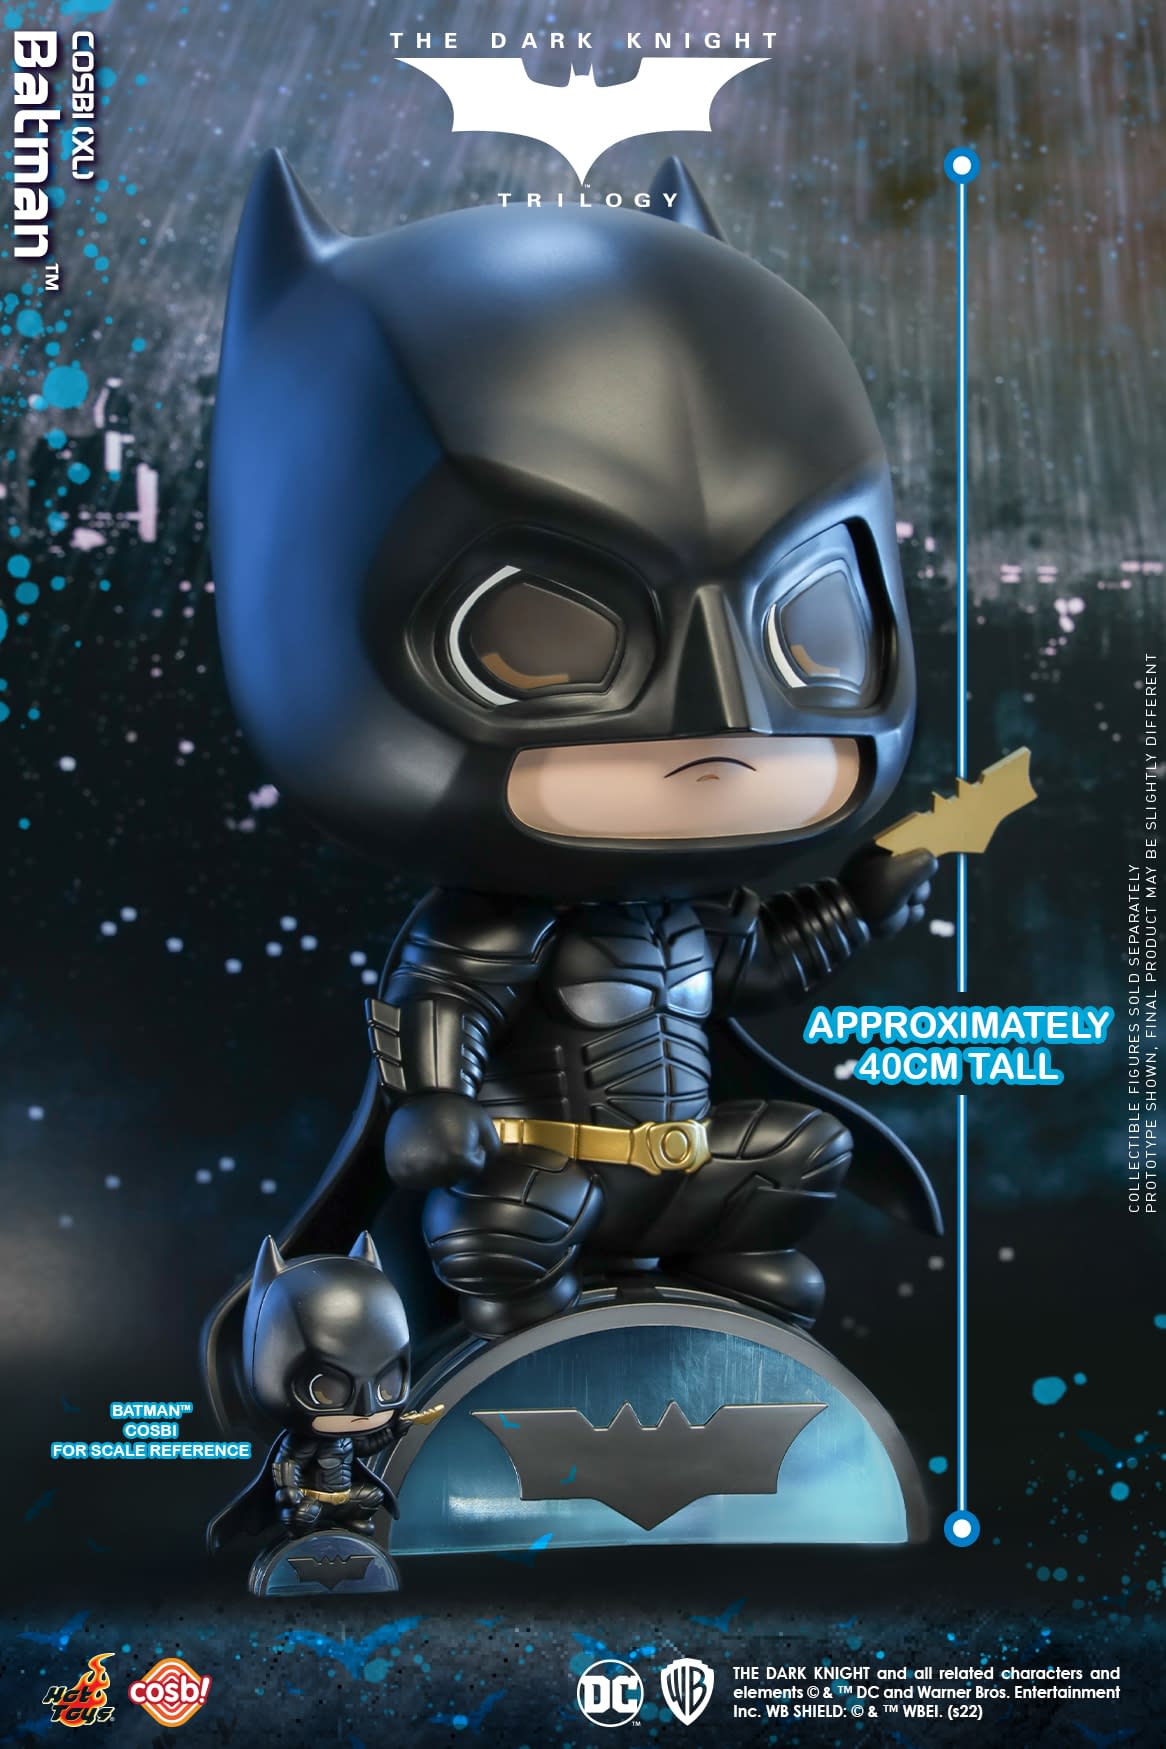 The Dark Knight Trilogy Gets Adorable New XL Figures from Hot Toys